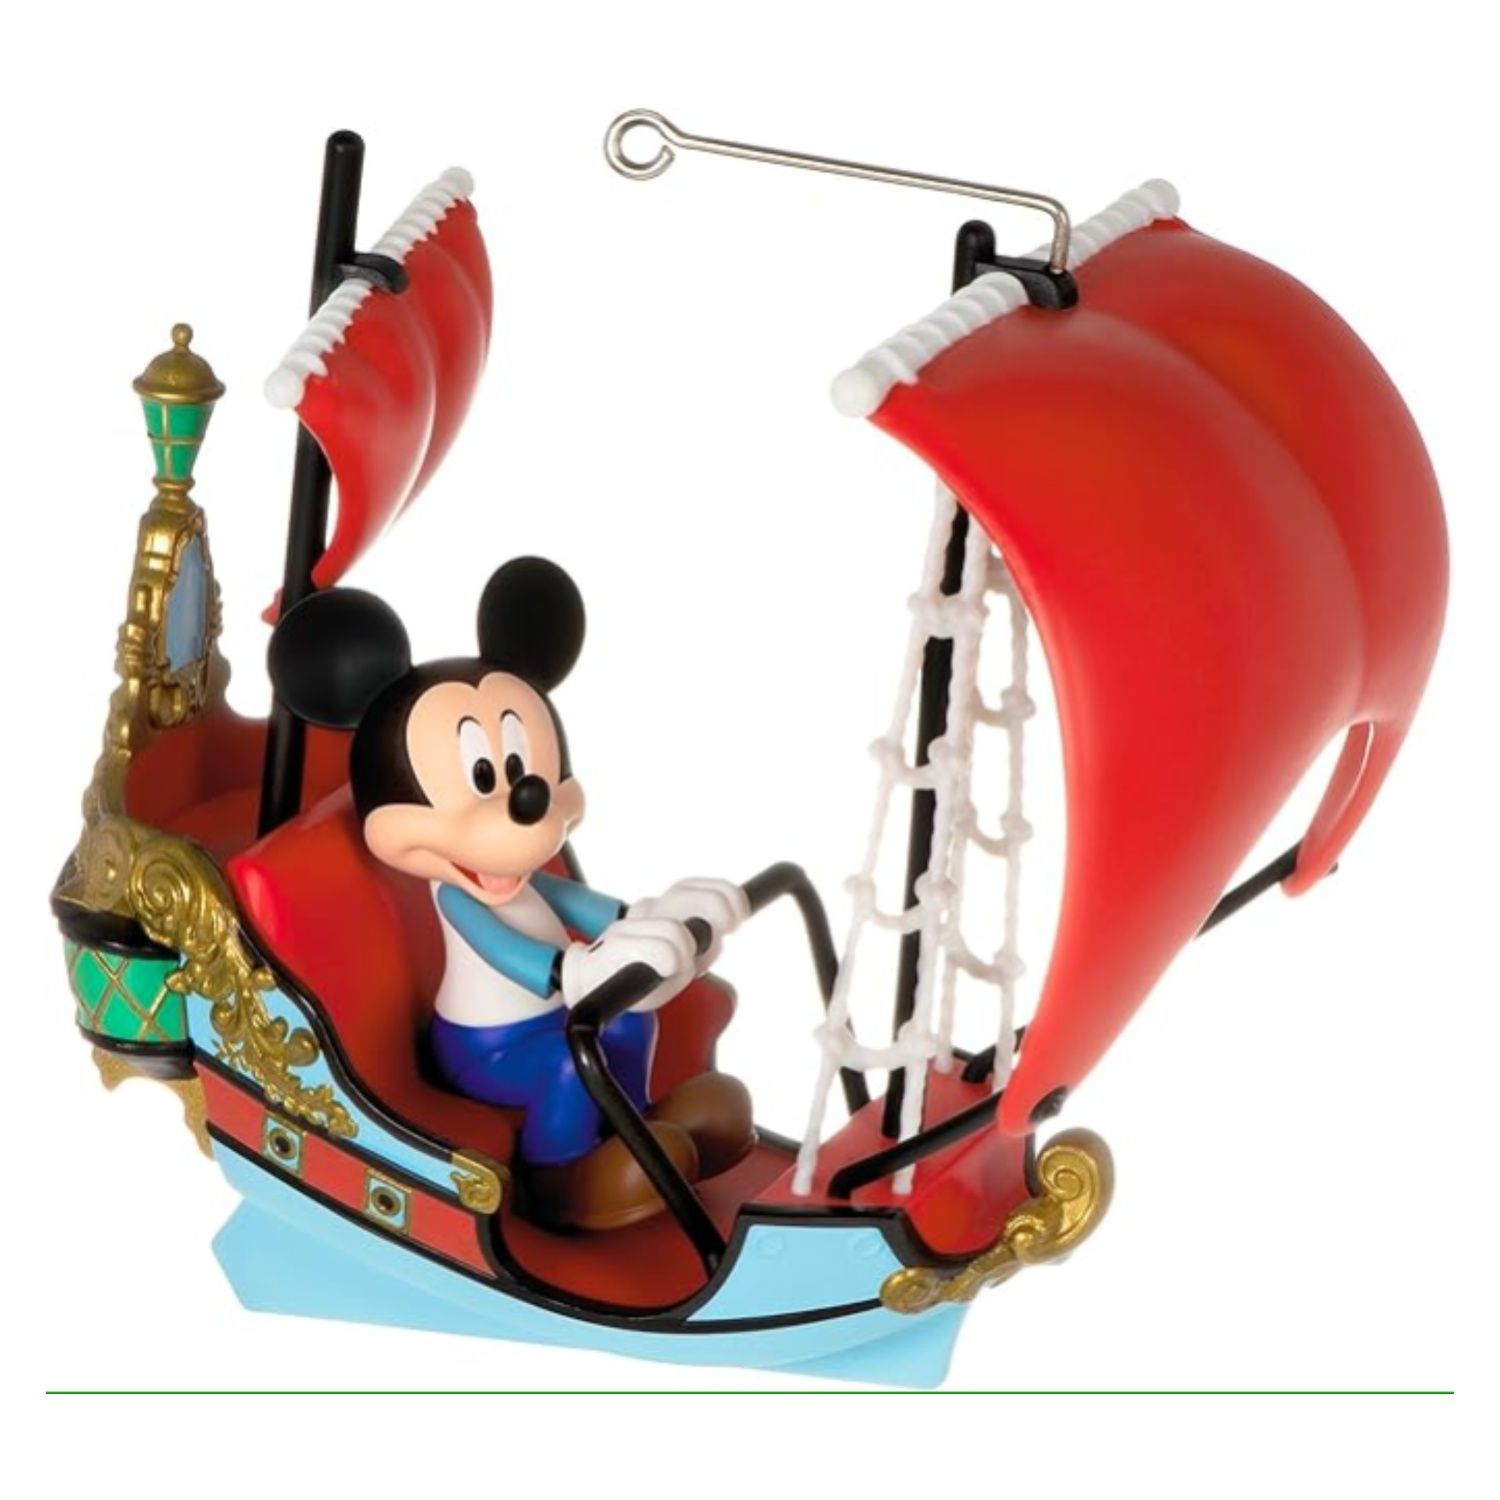 For this ornament, Mickey Mouse is sitting in a Peter Pan Ship used for the amusement park ride